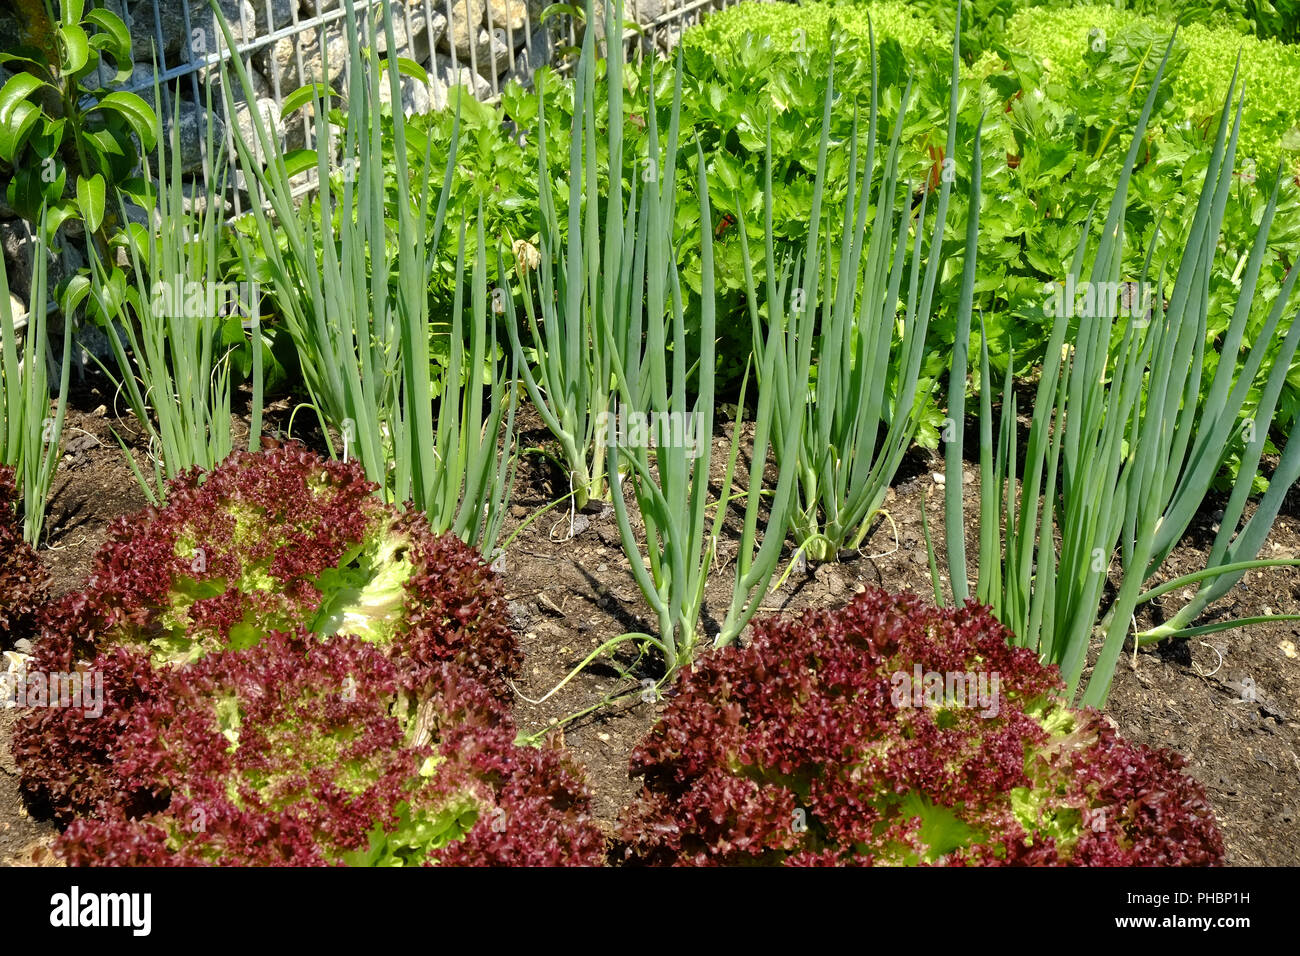 Lettuce cultivation, salat bed Stock Photo